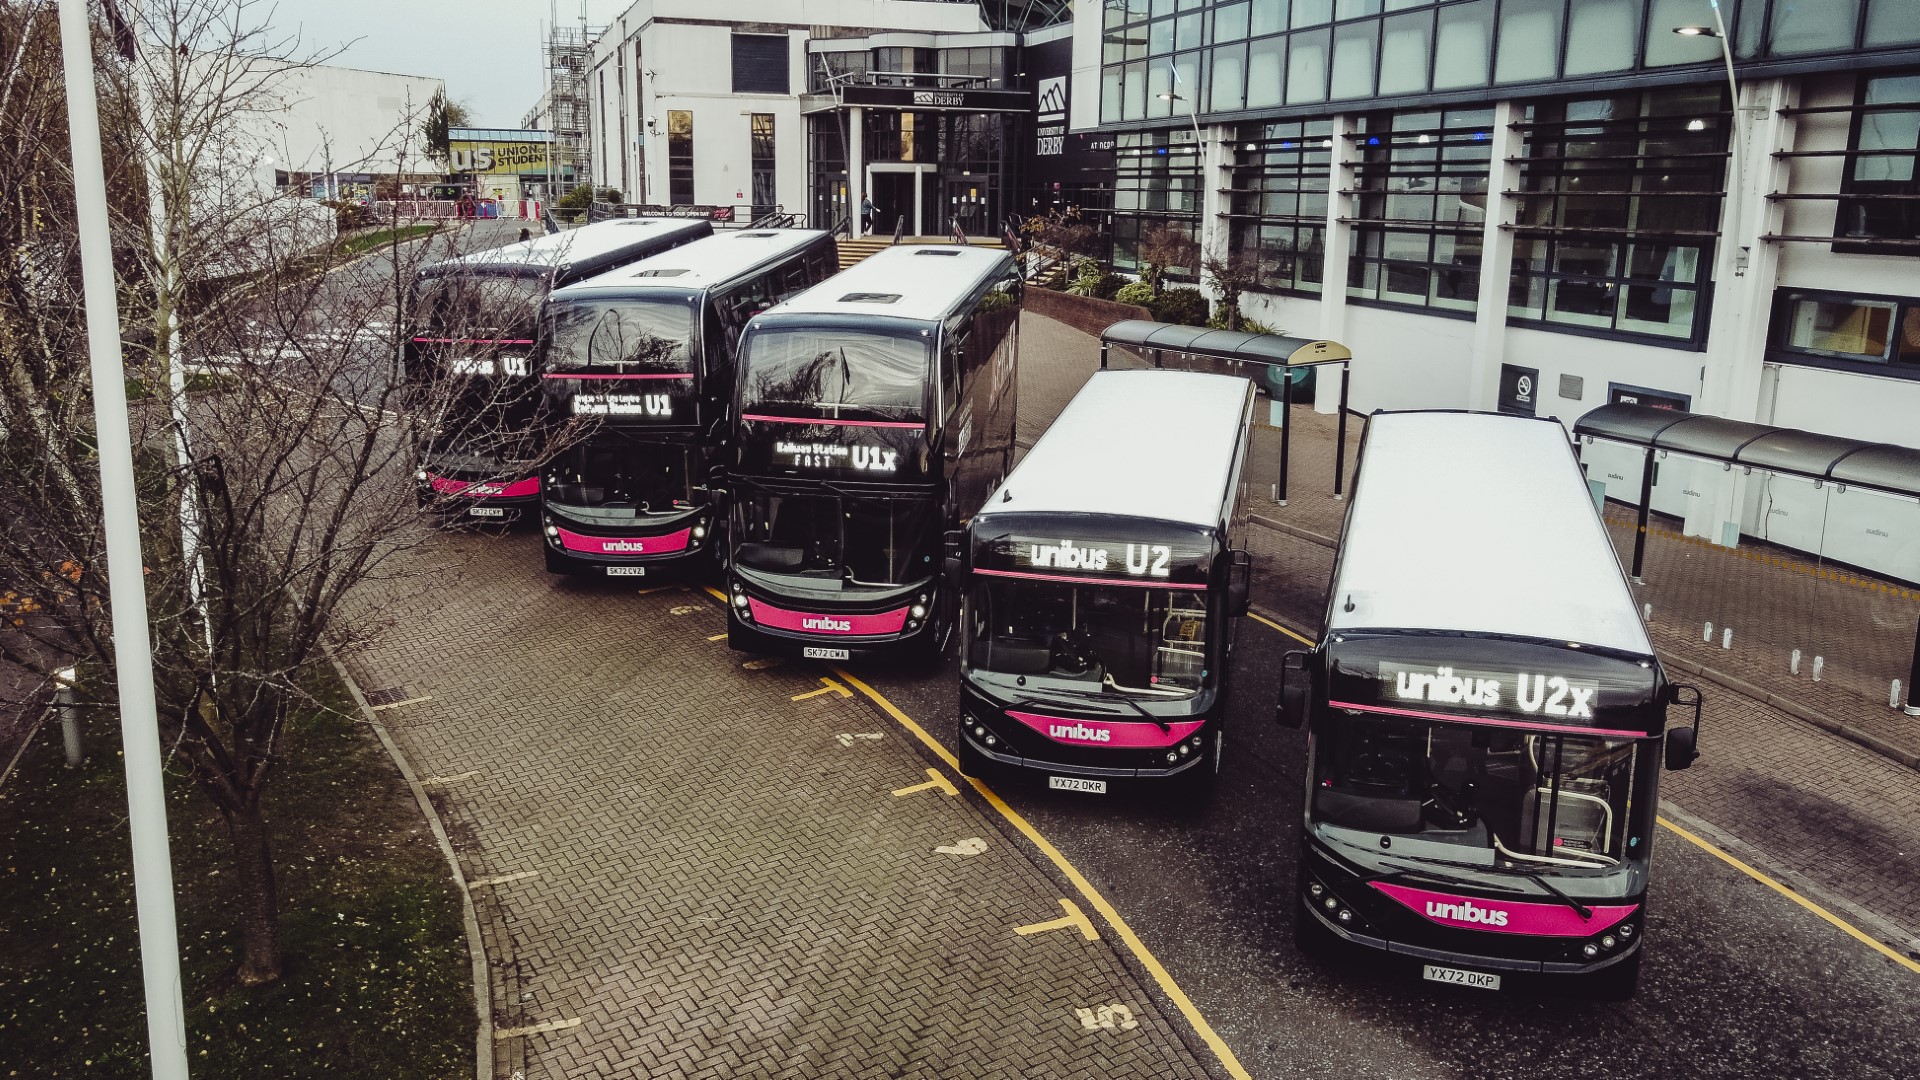 New Unibus fleet for Notts and Derby